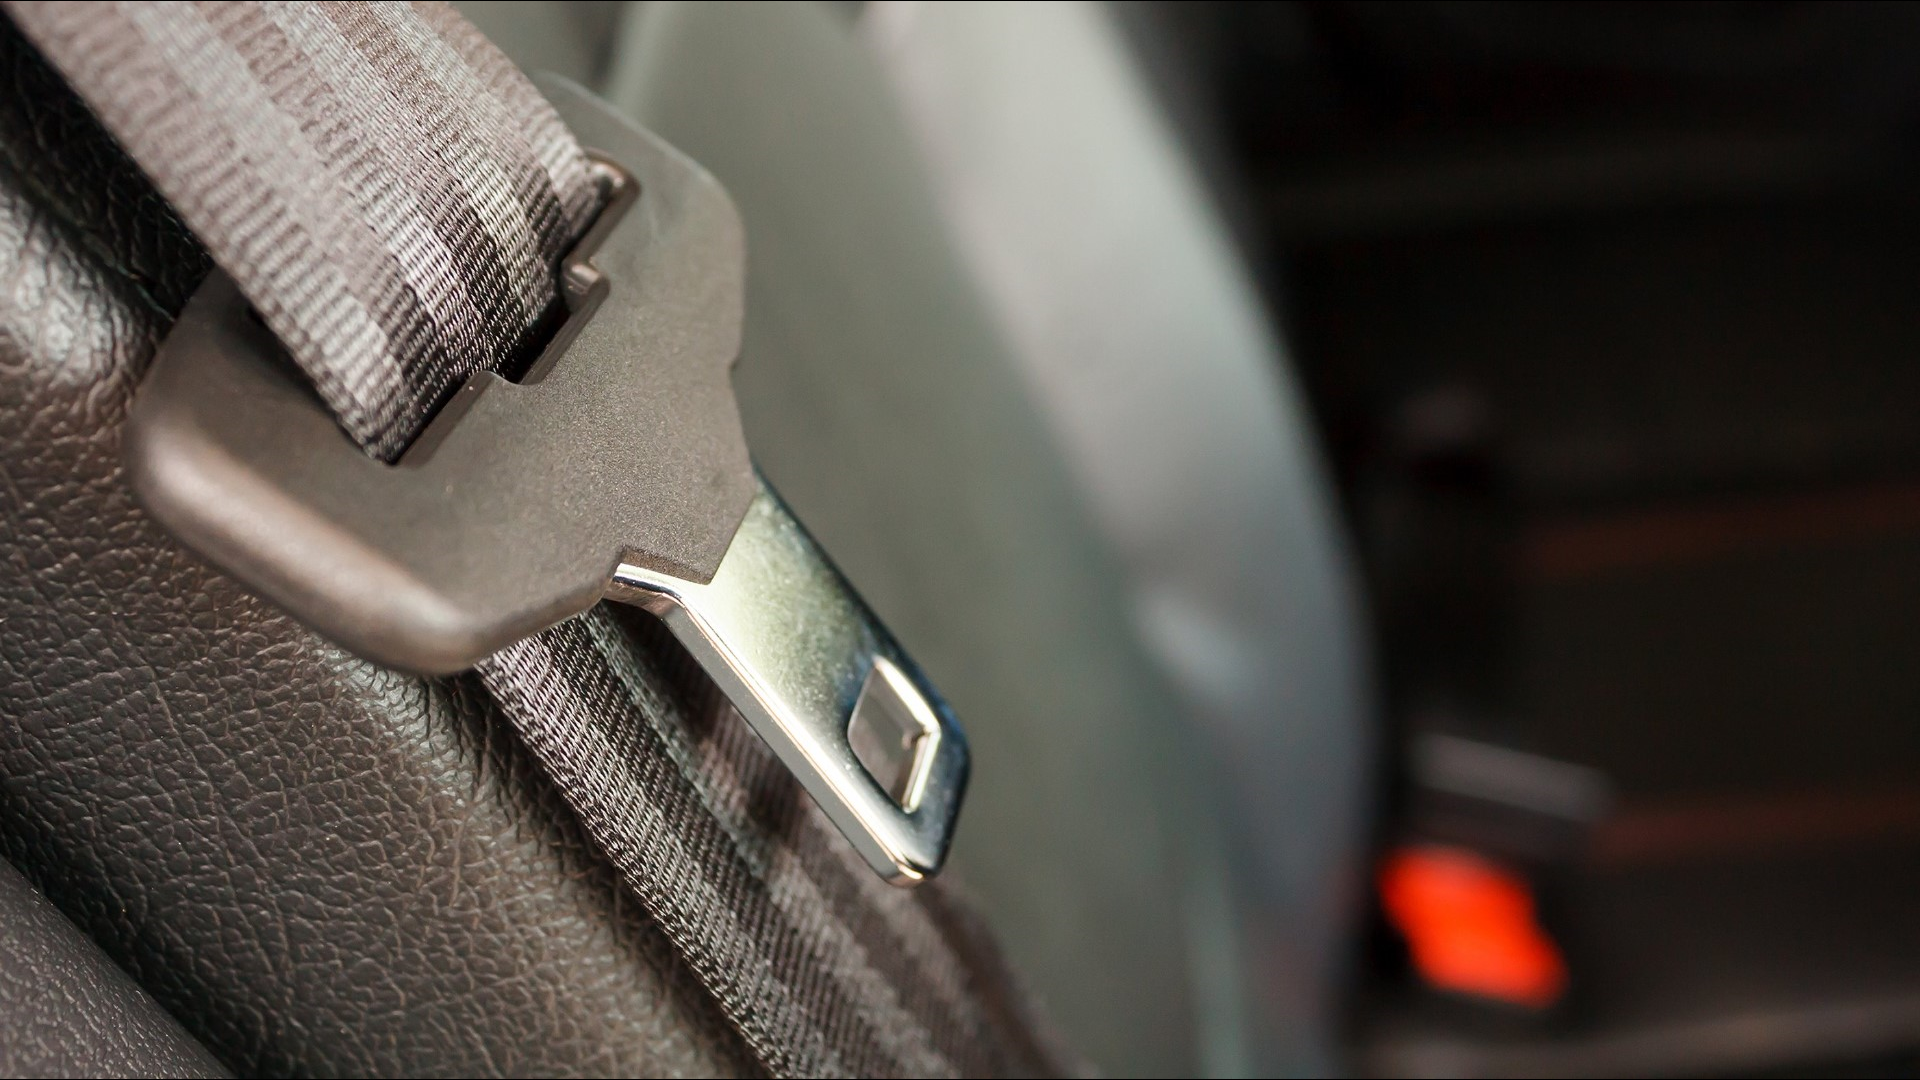 Seatbelts save more than 13,000 lives each year, according to the National Highway Safety Administration. In 2021, half of crash fatalities weren't wearing one.